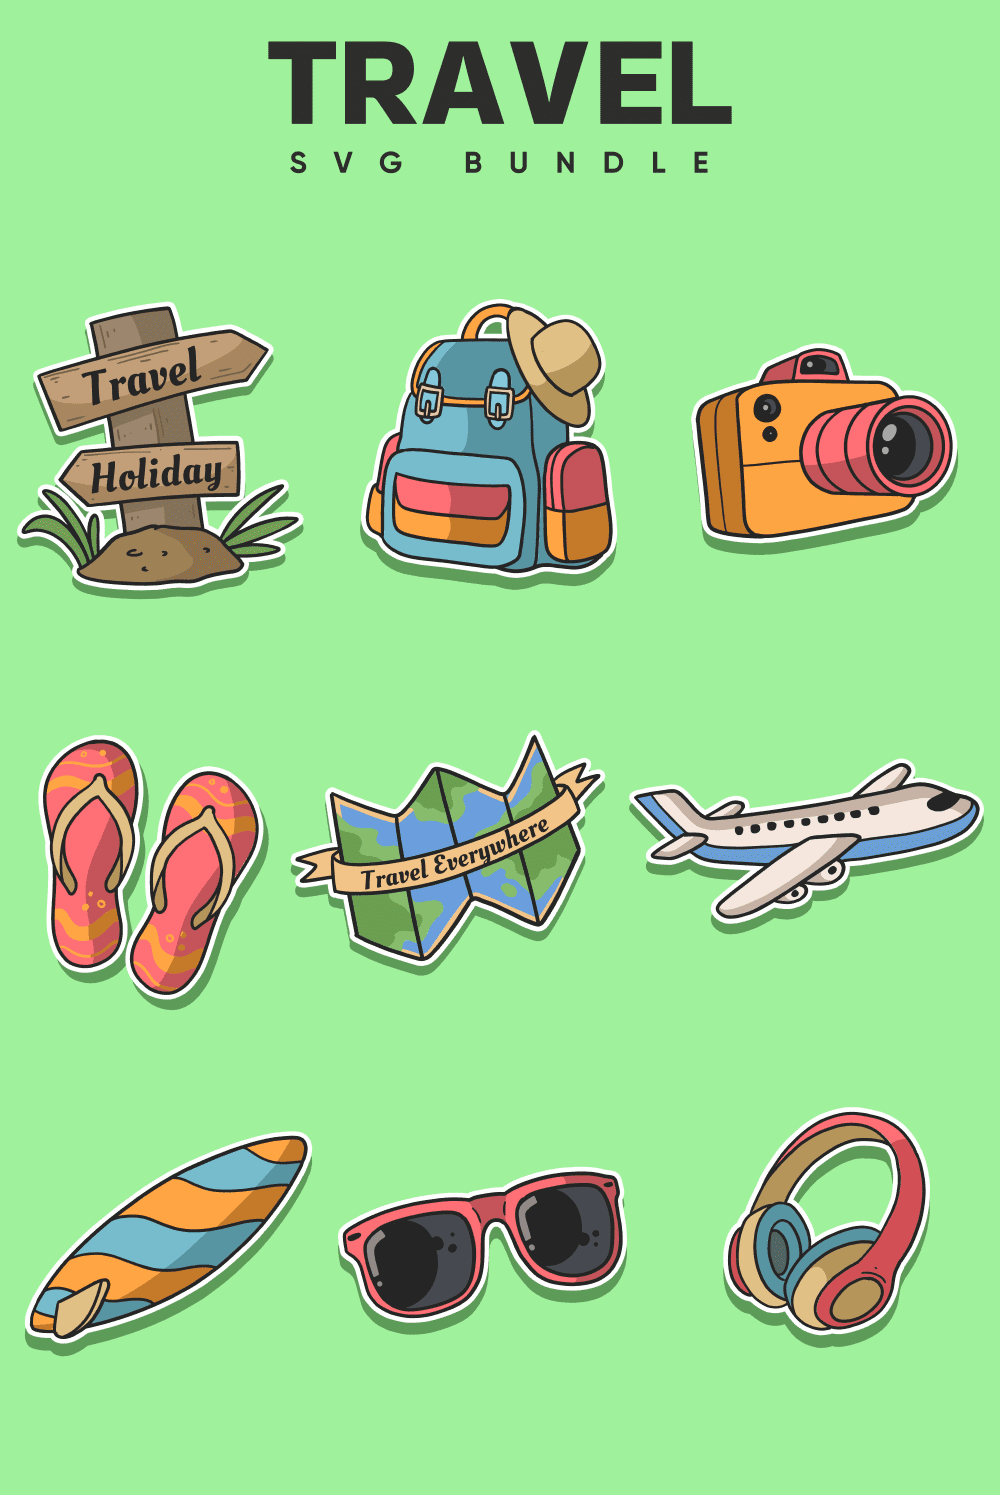 Pinterest picture with travel accessories on light green background.